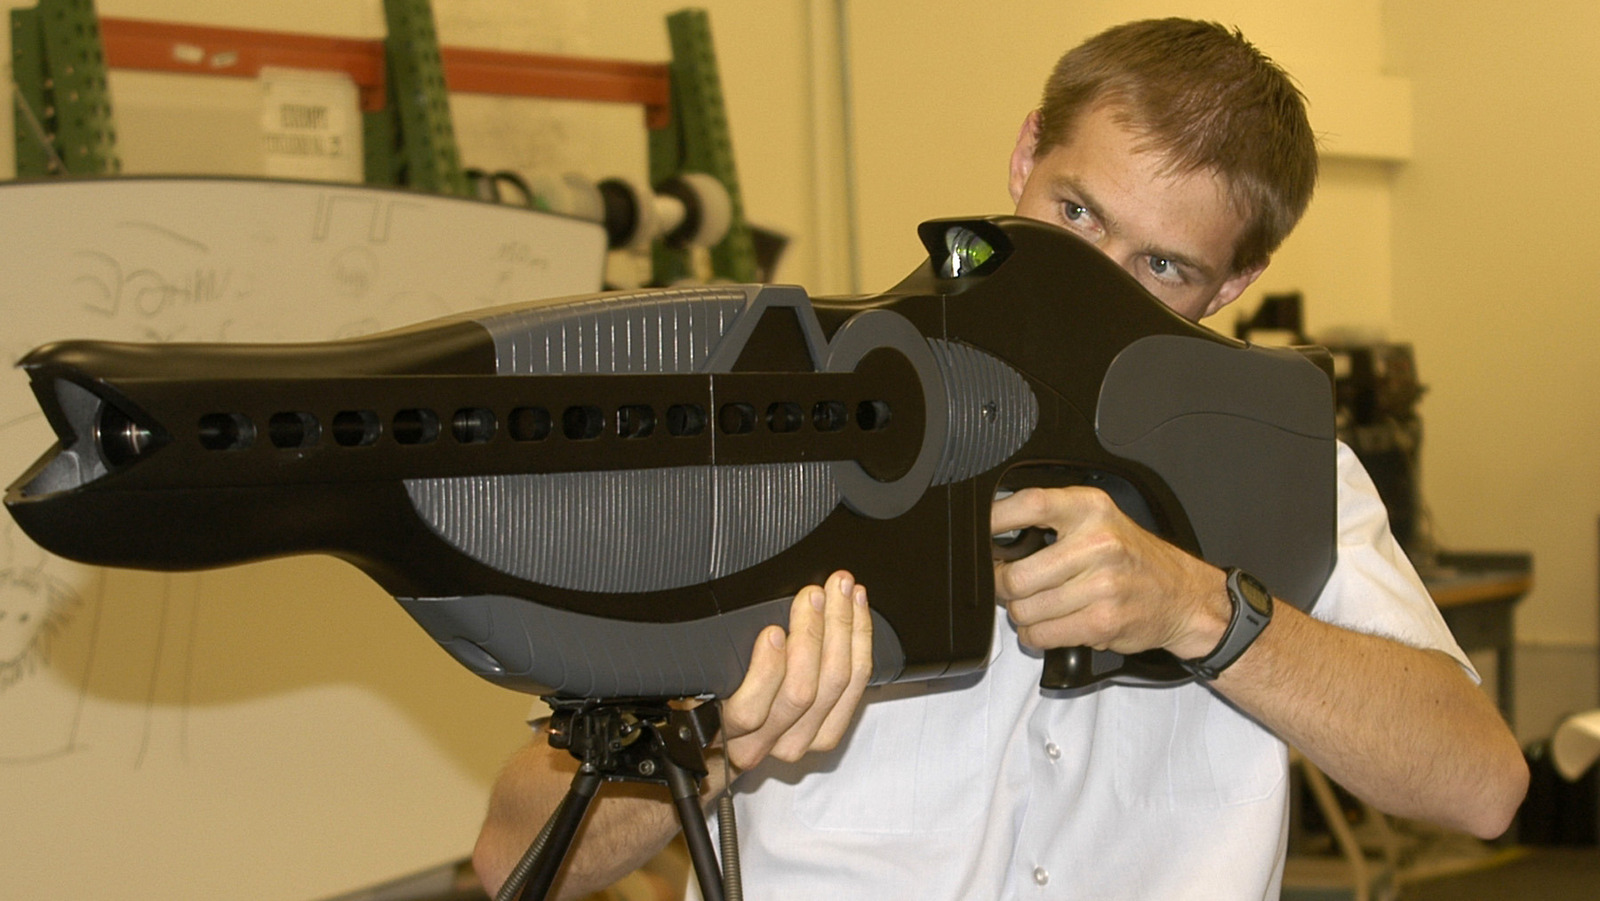 How The U.S. Military Developed A Rifle That Caused Temporary Blindness – SlashGear